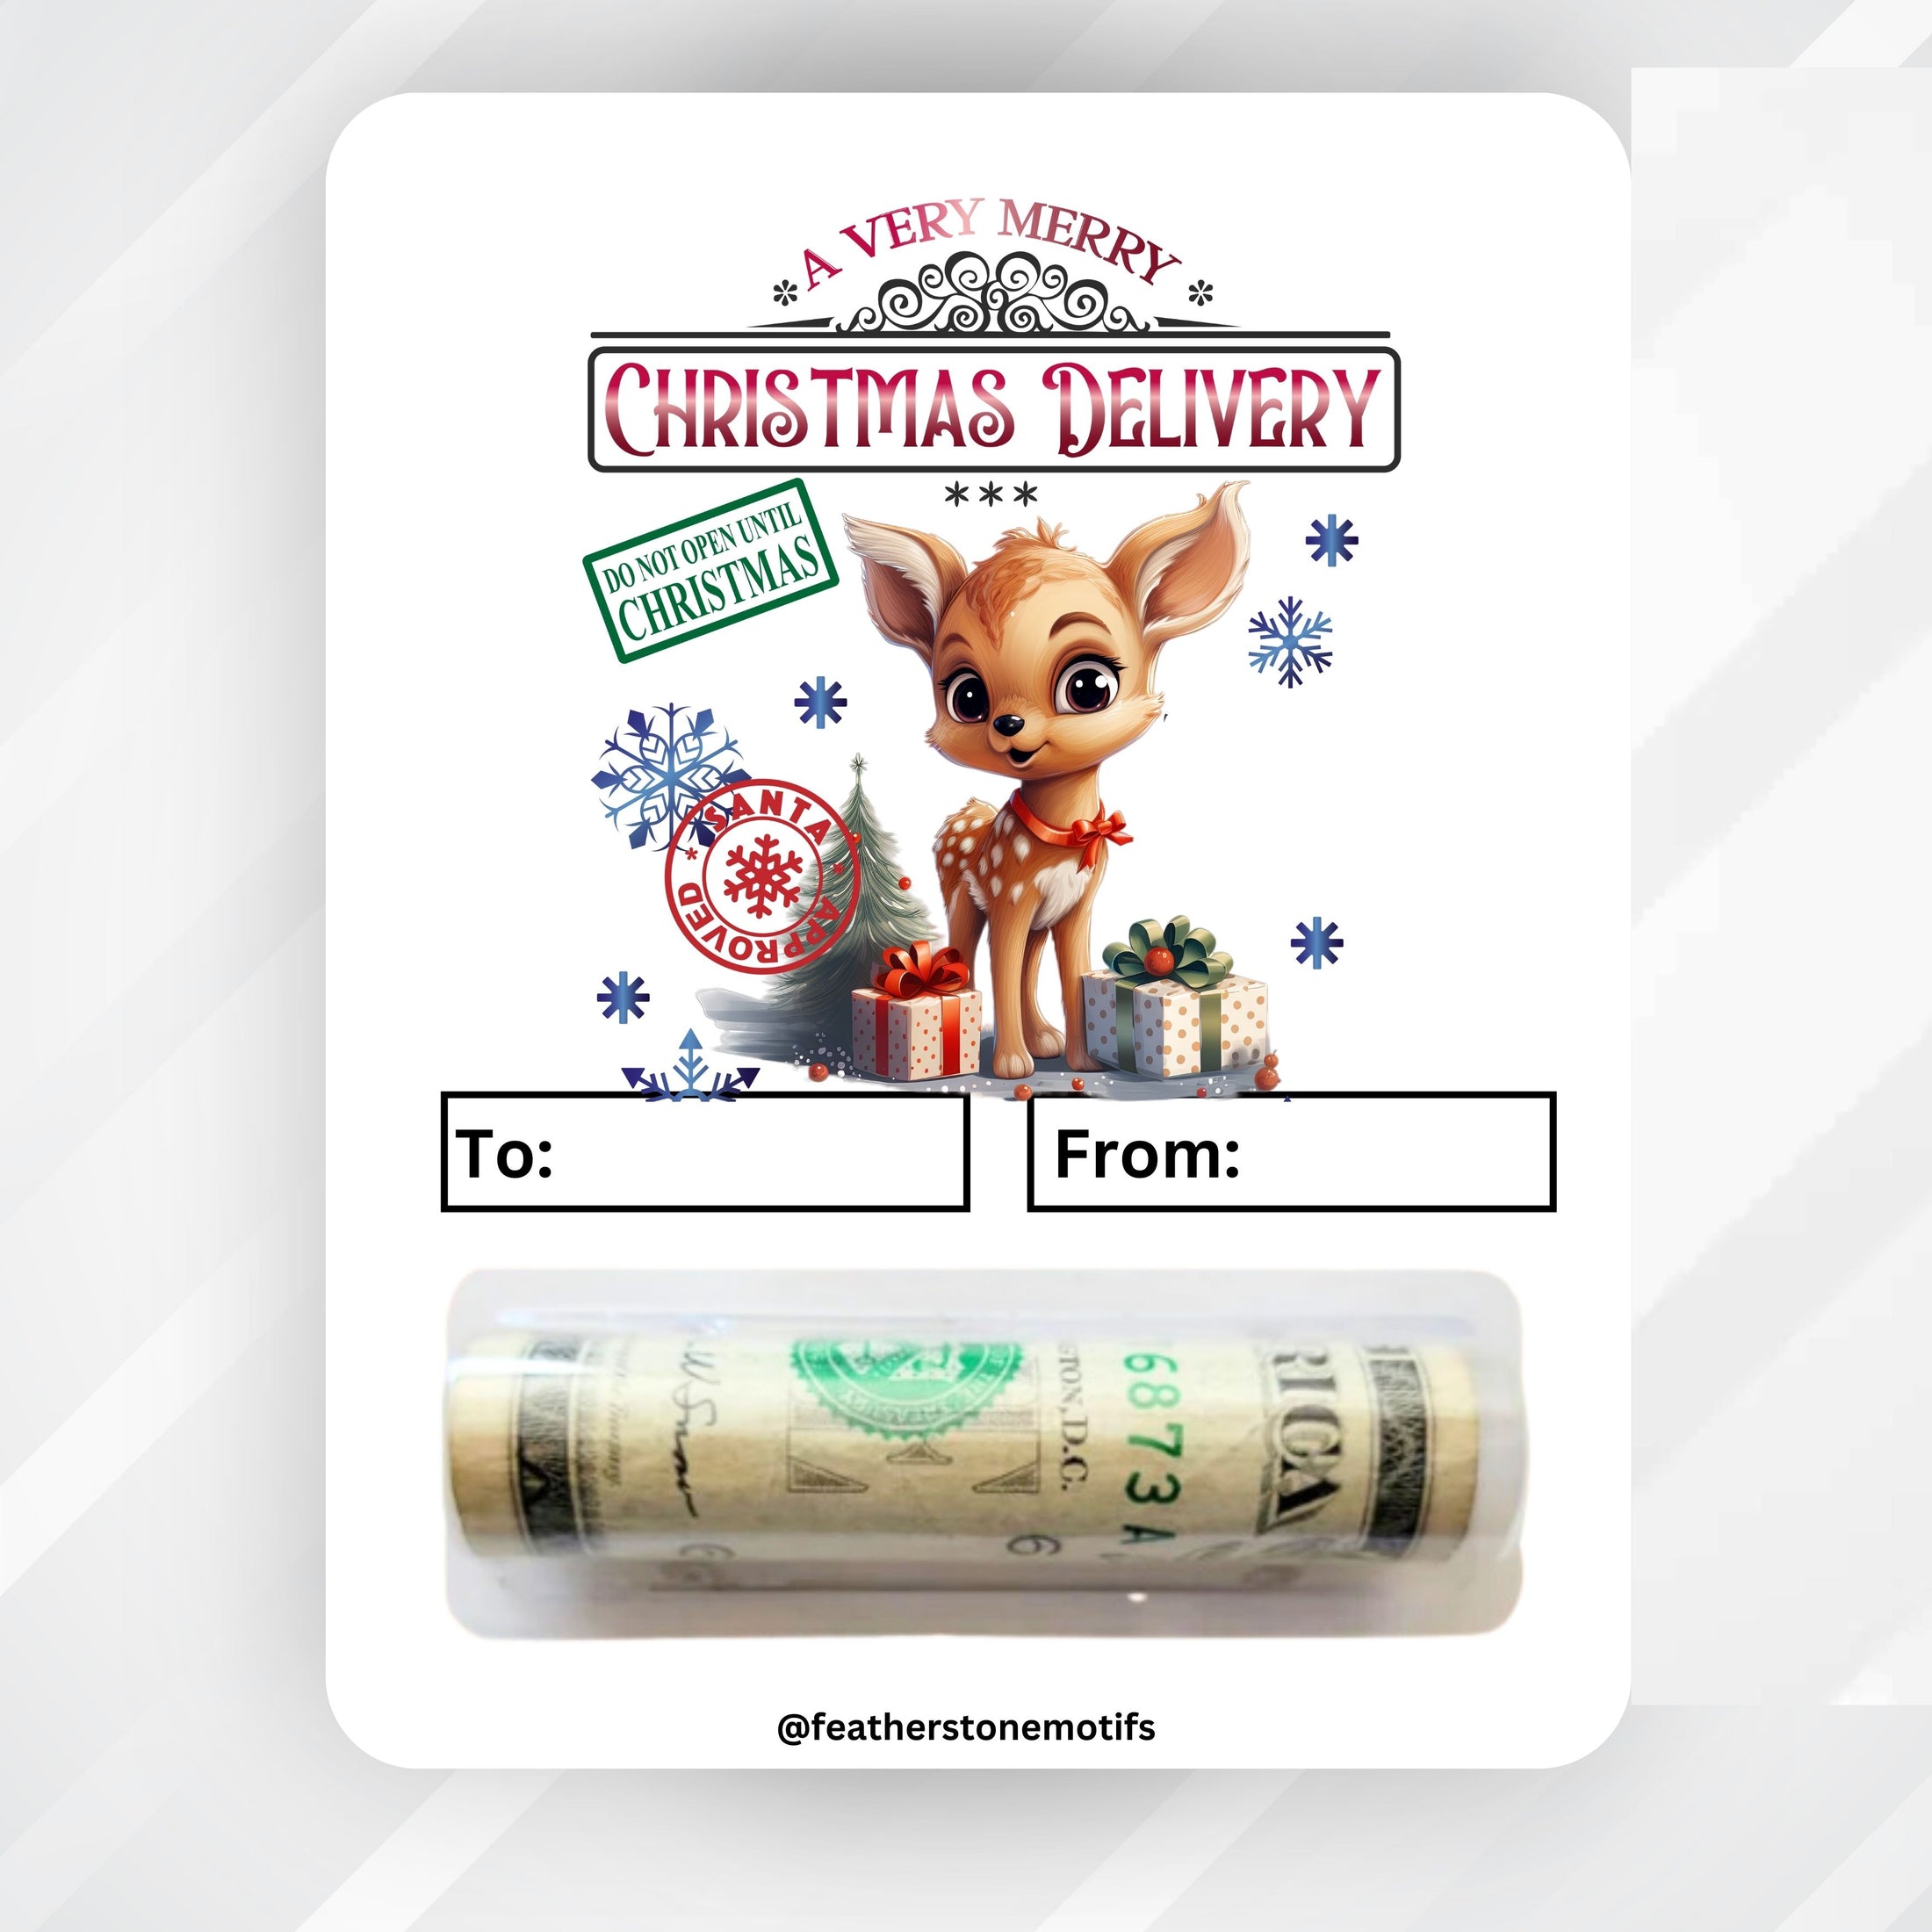 This image shows the money tube attached to the Christmas Deer Money Card.